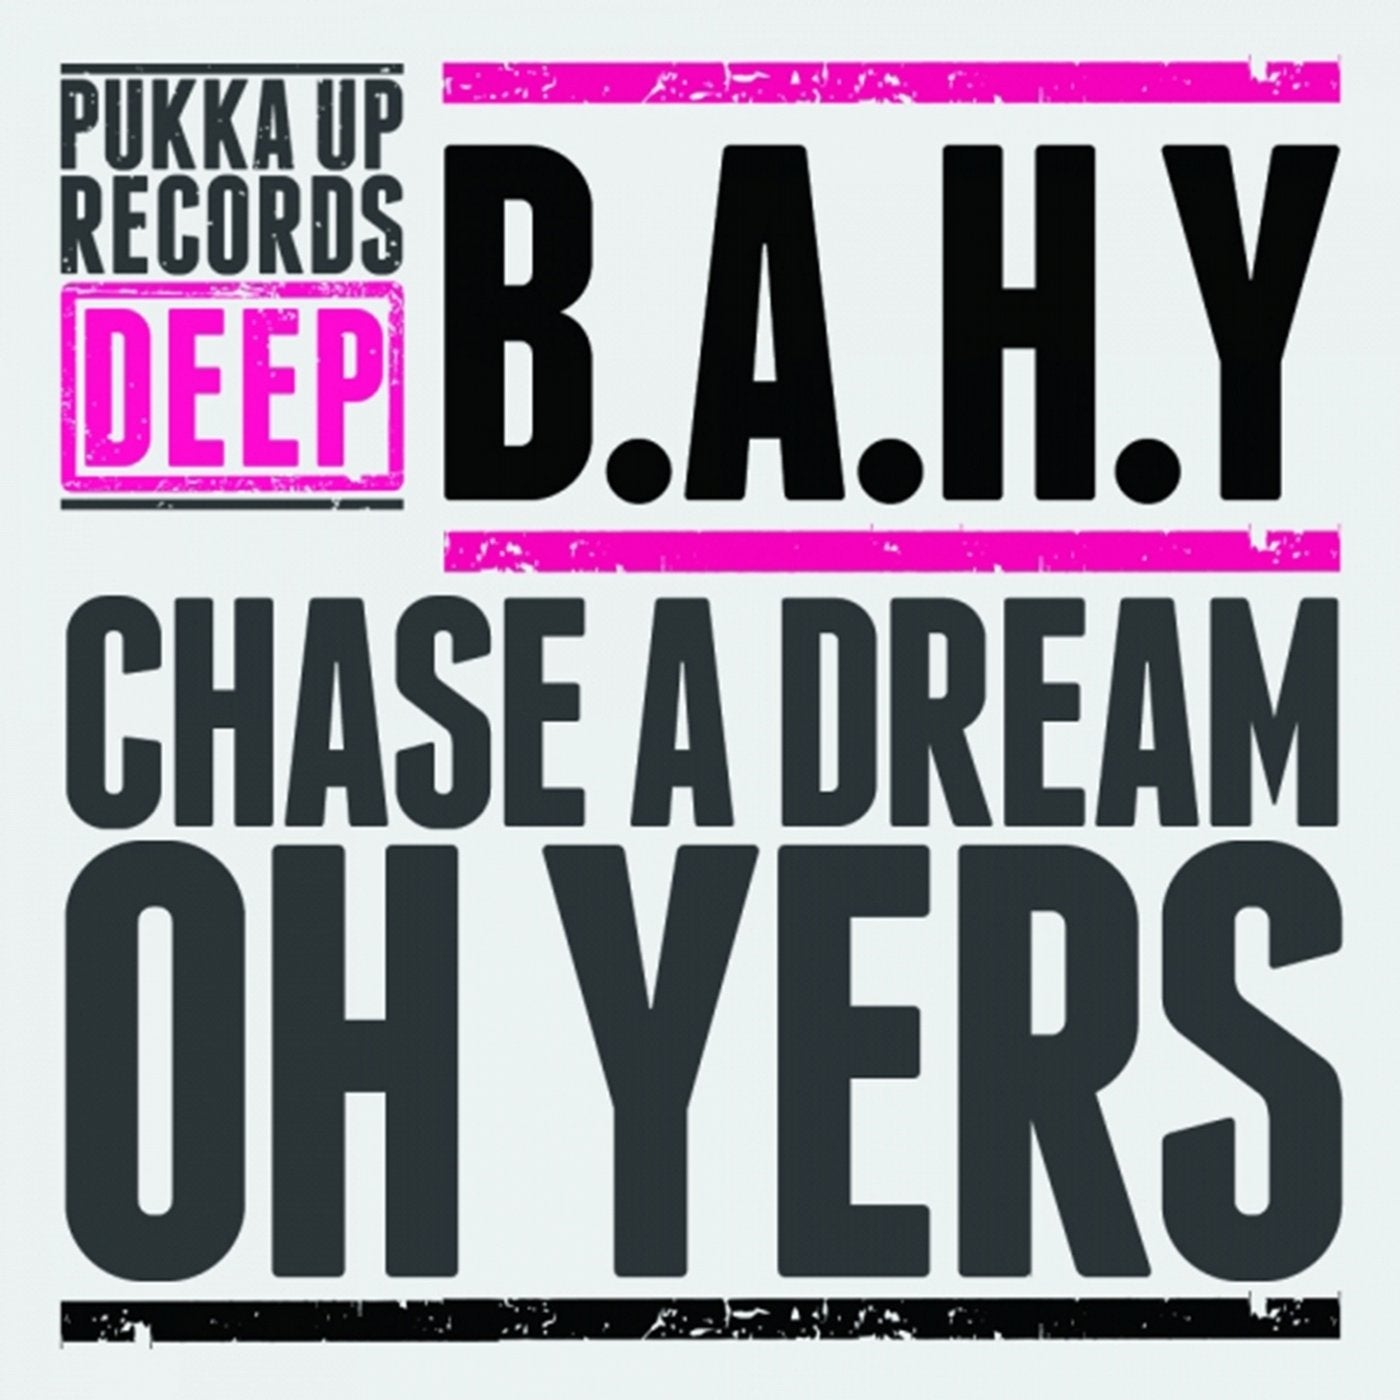 Chase a Dream / Oh Yers